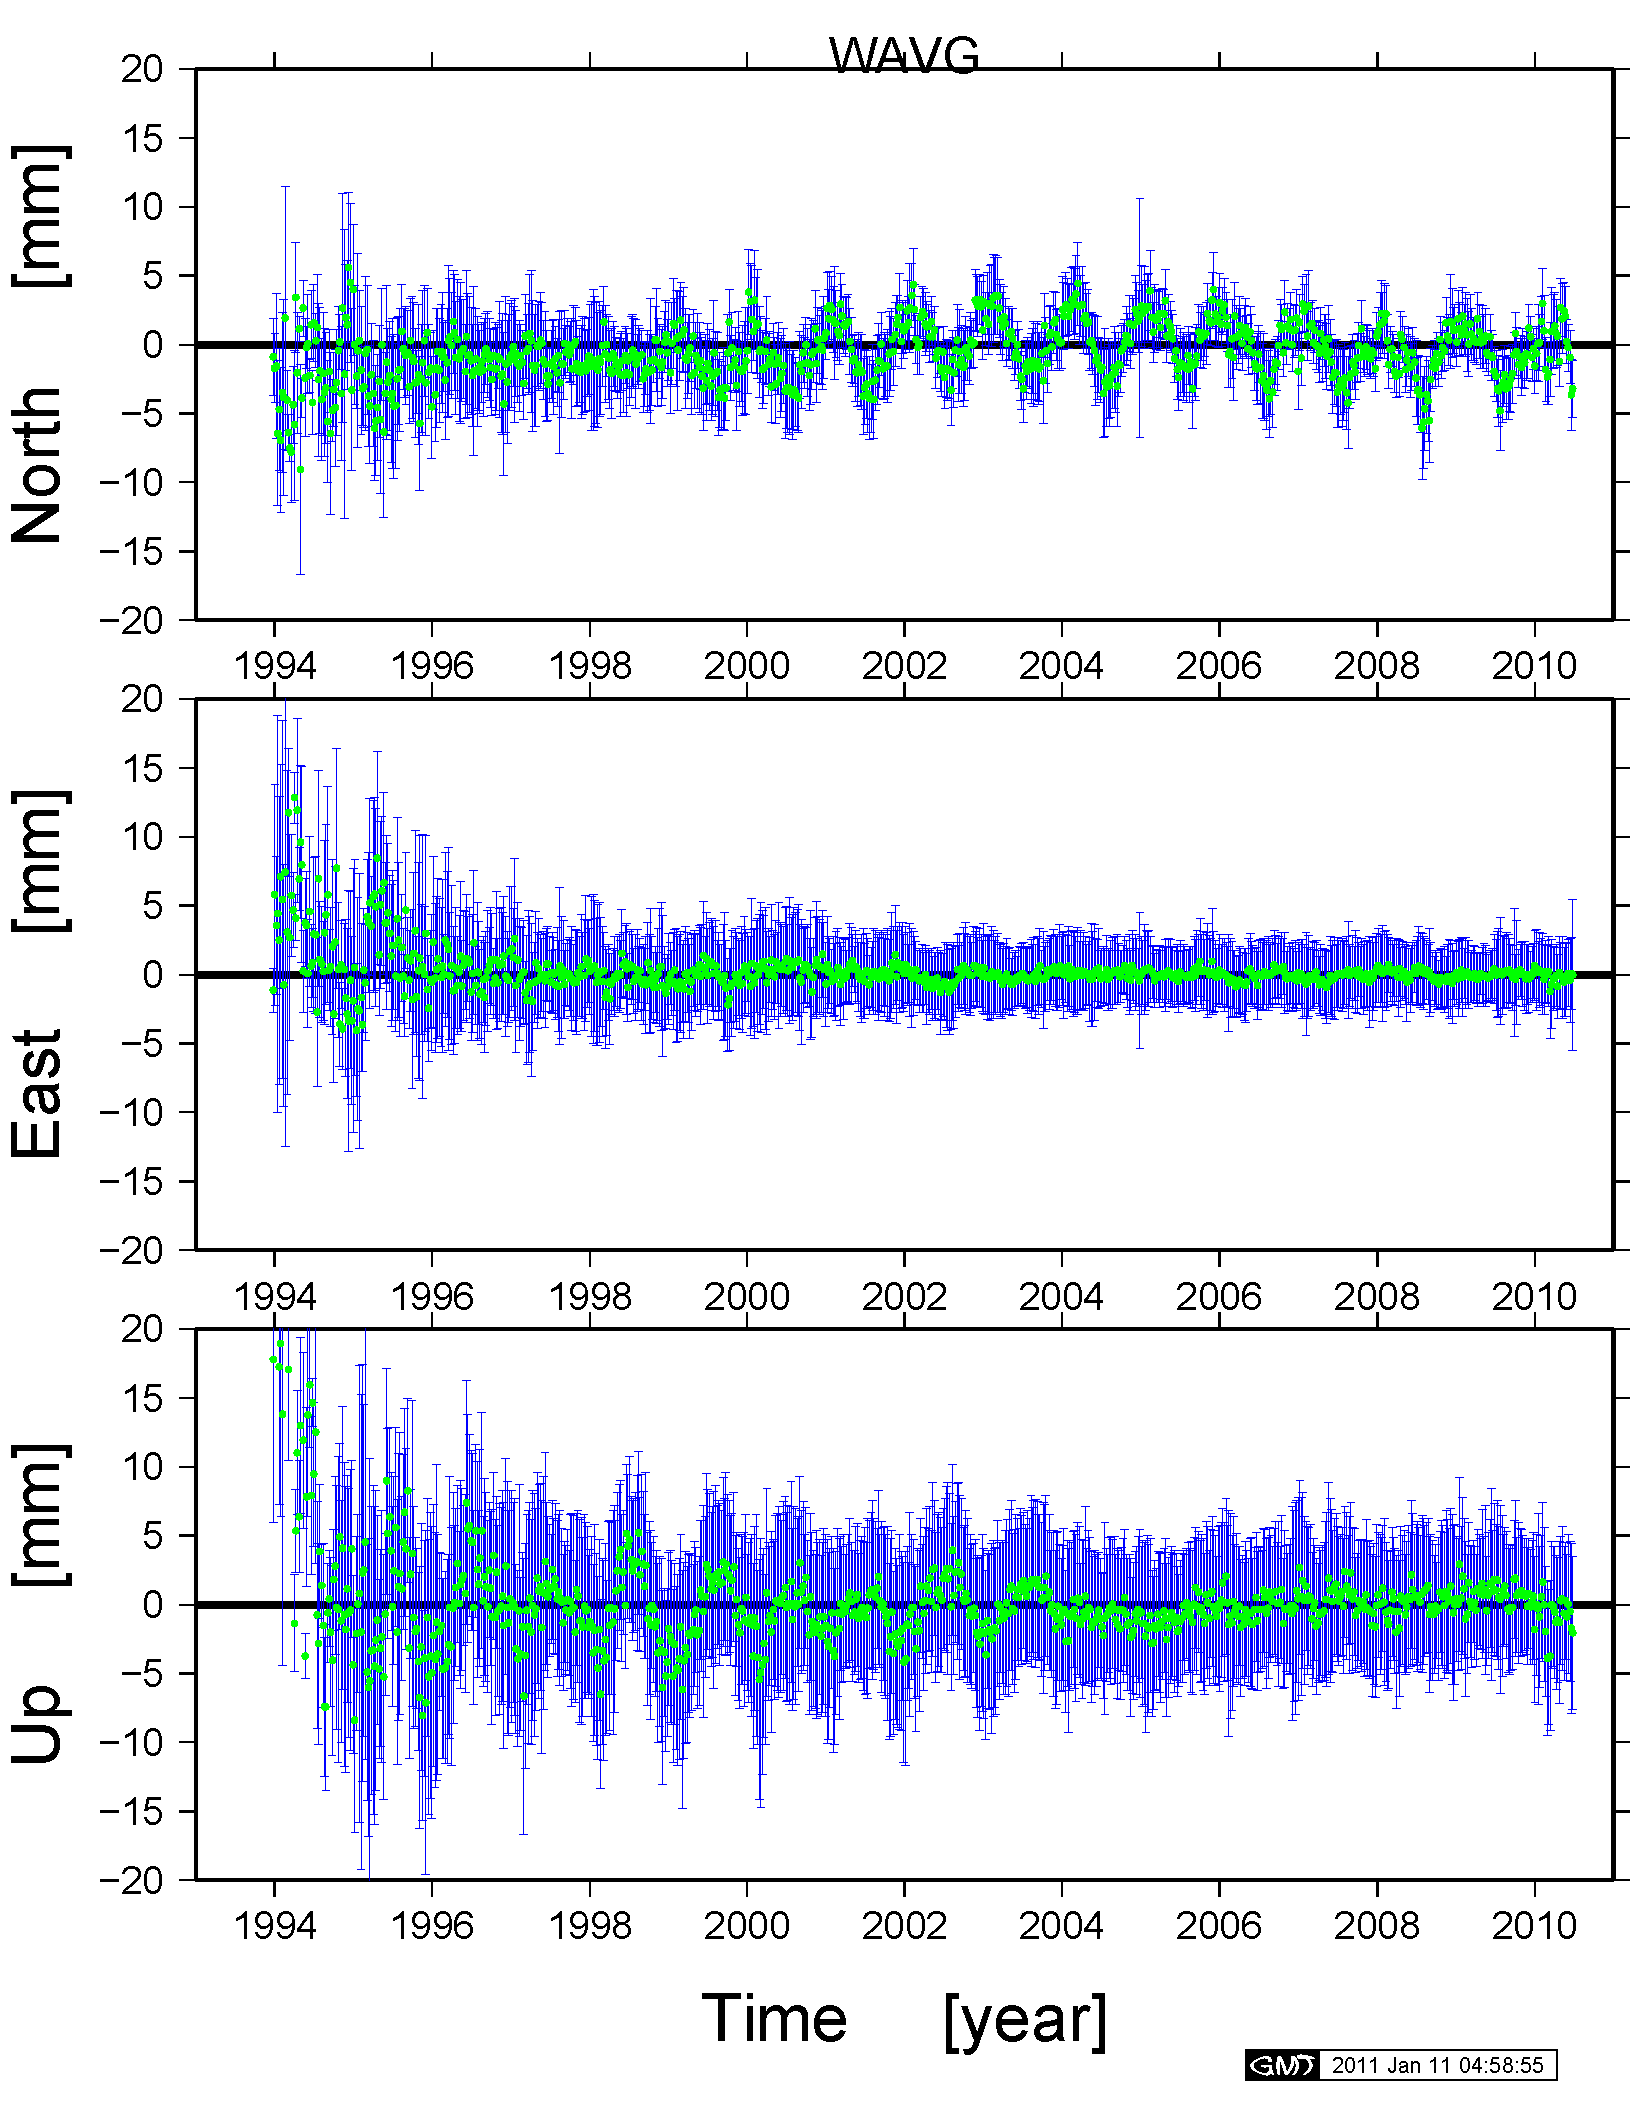 NCN stacking: Time-series of the weighted-average of the coordinate residuals taken over the subnetwork